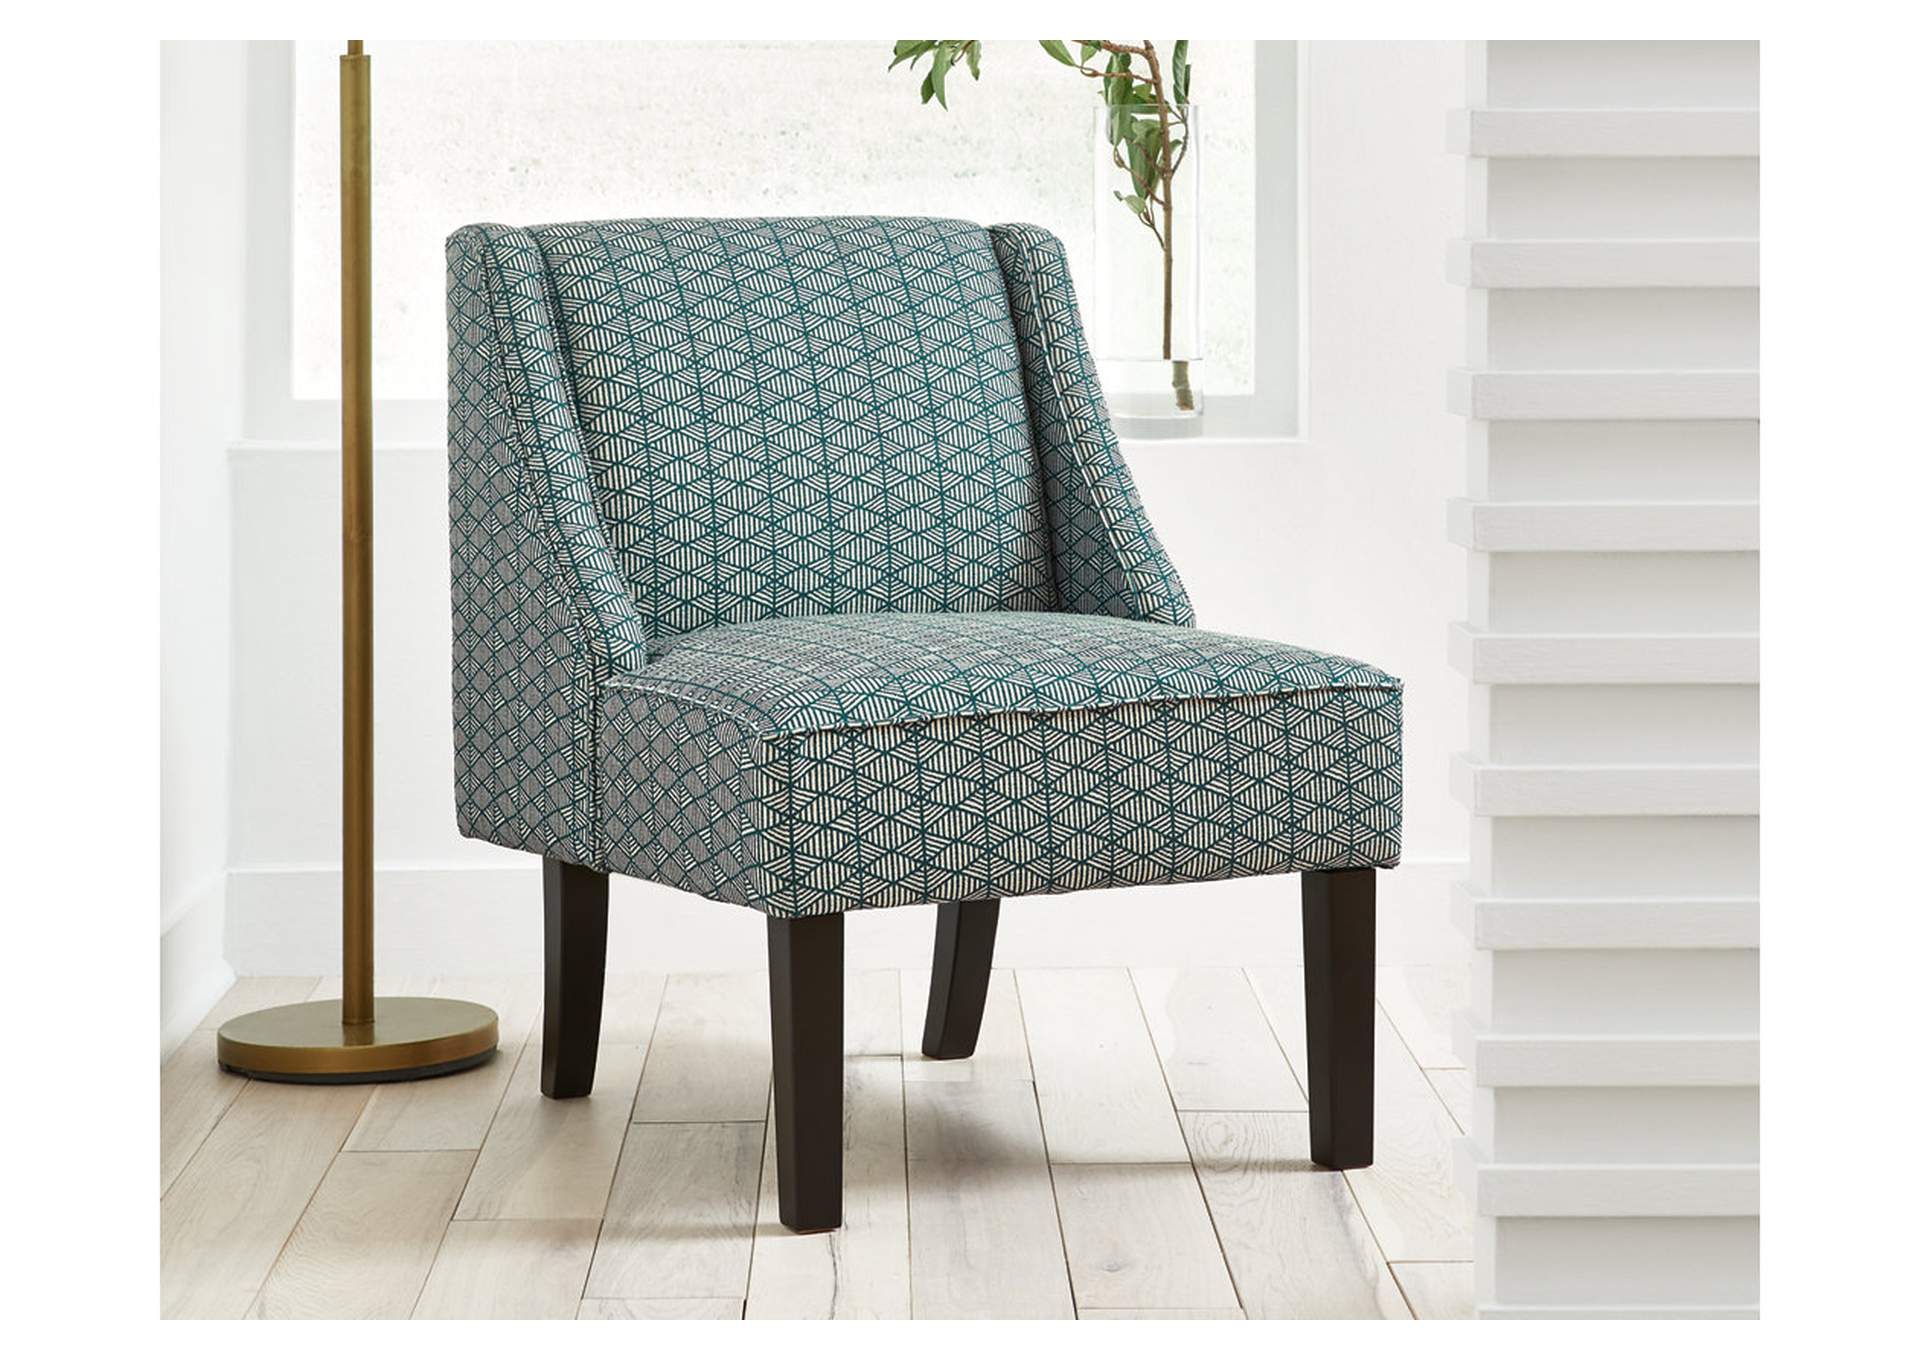 Janesley Accent Chair,Signature Design By Ashley